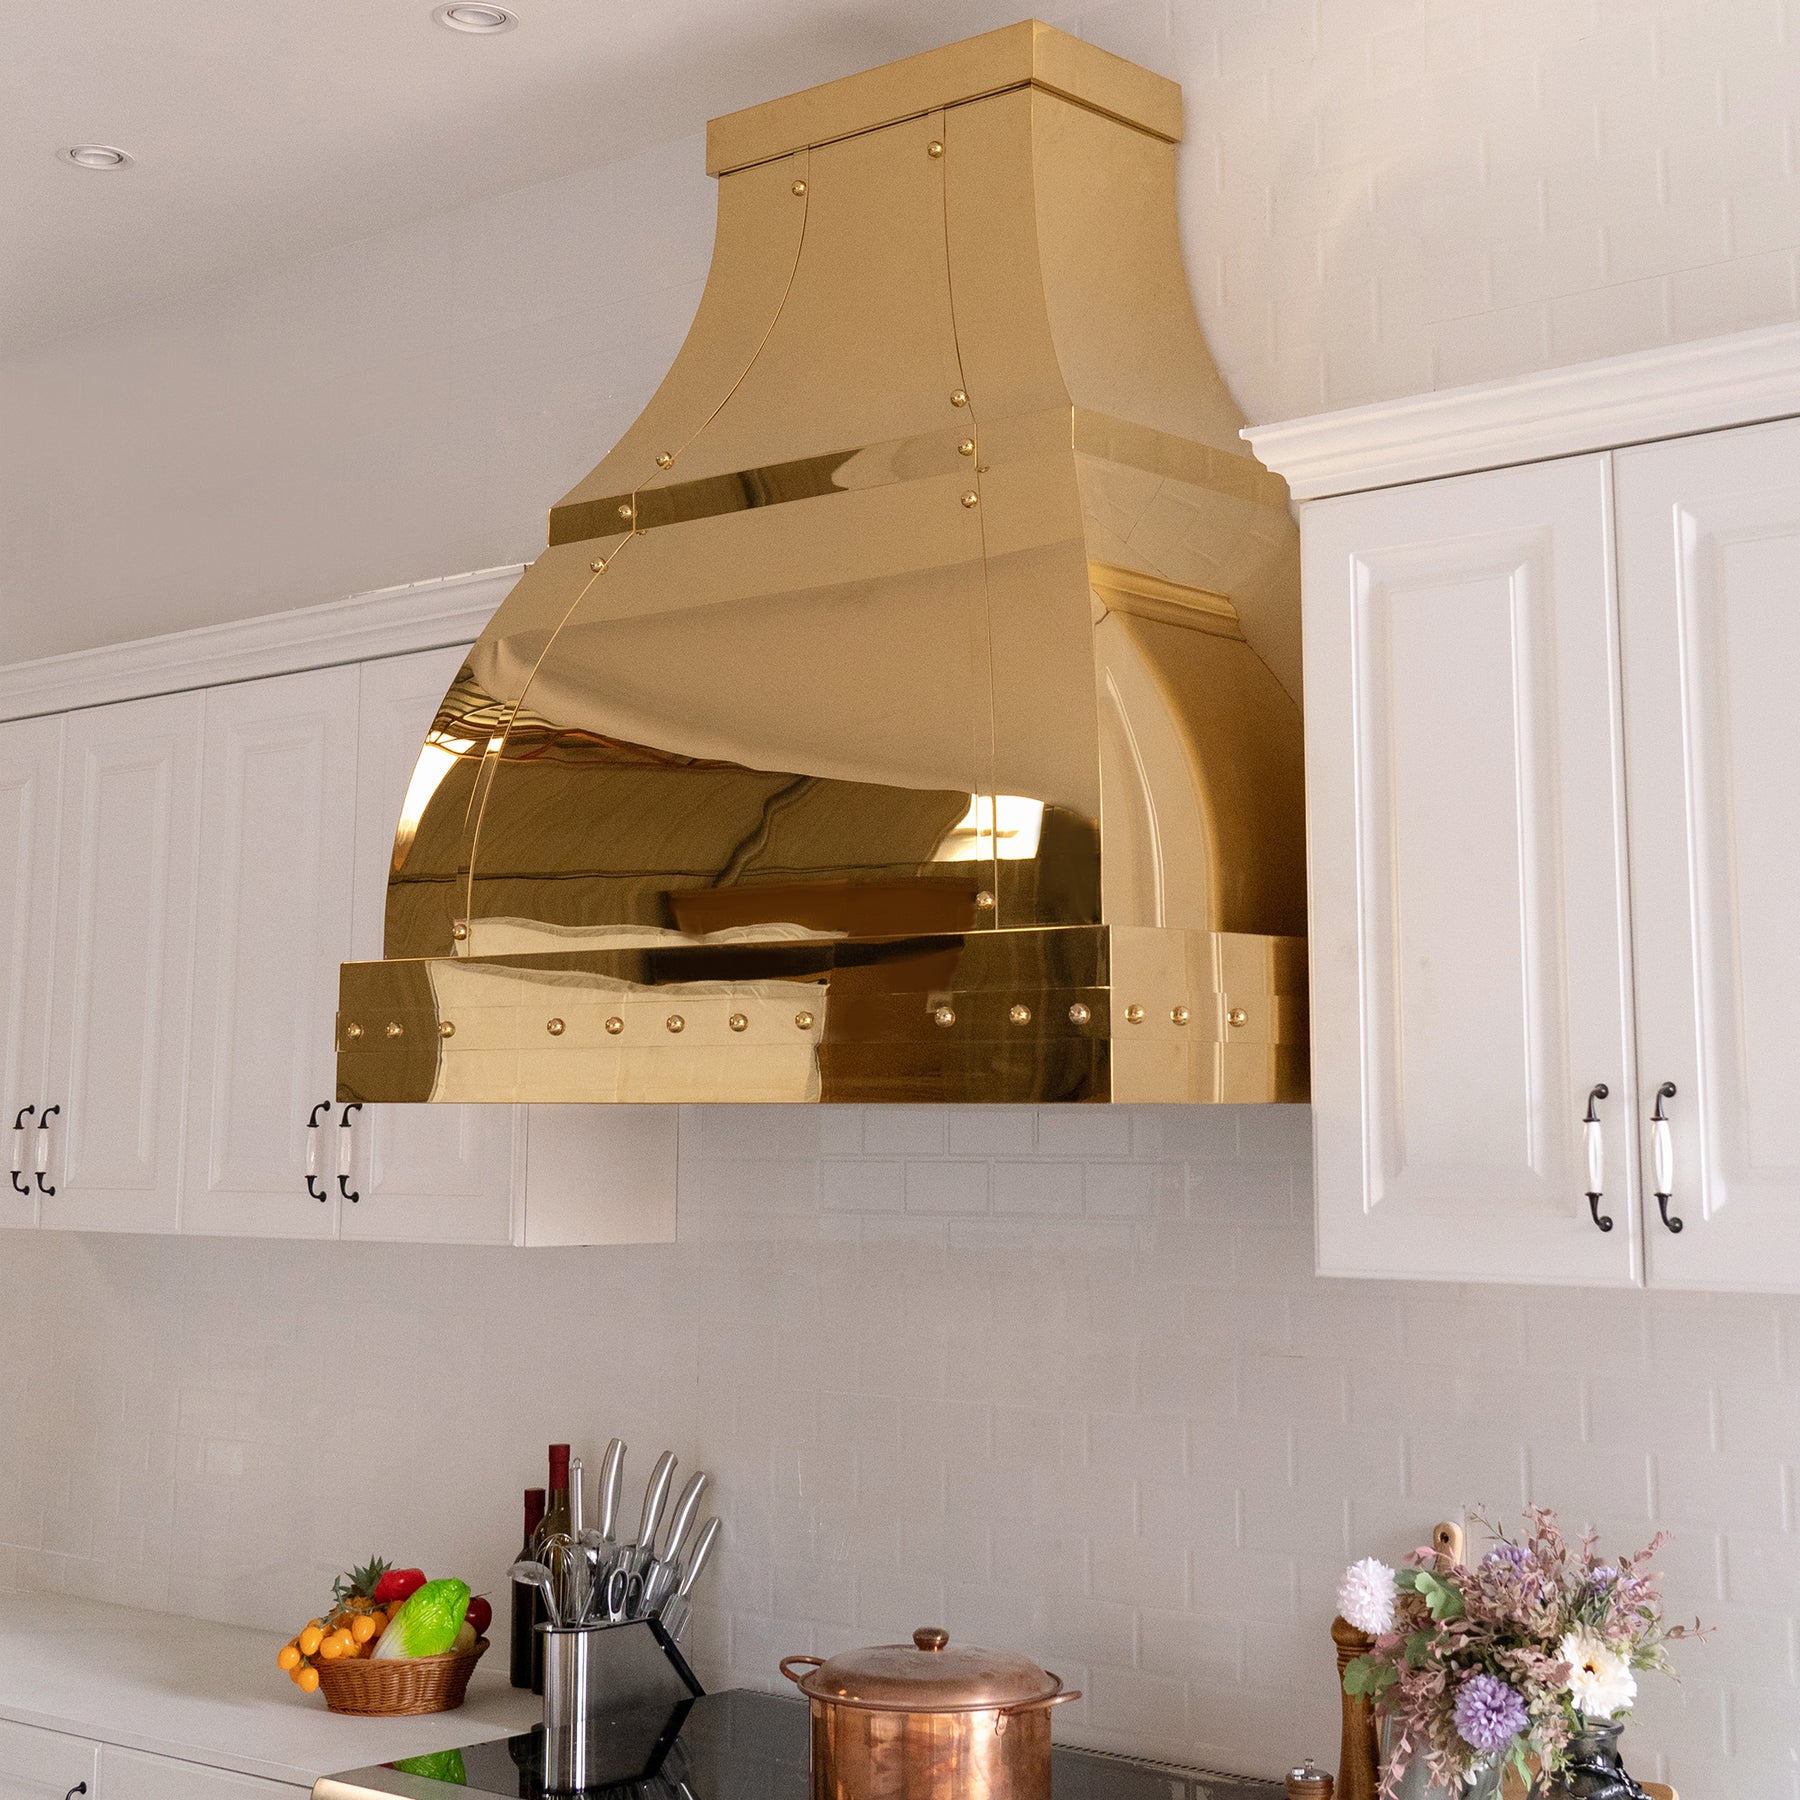 Fobest custom handmade polished brass range hood with brass straps and rivets installed in the white kitchen